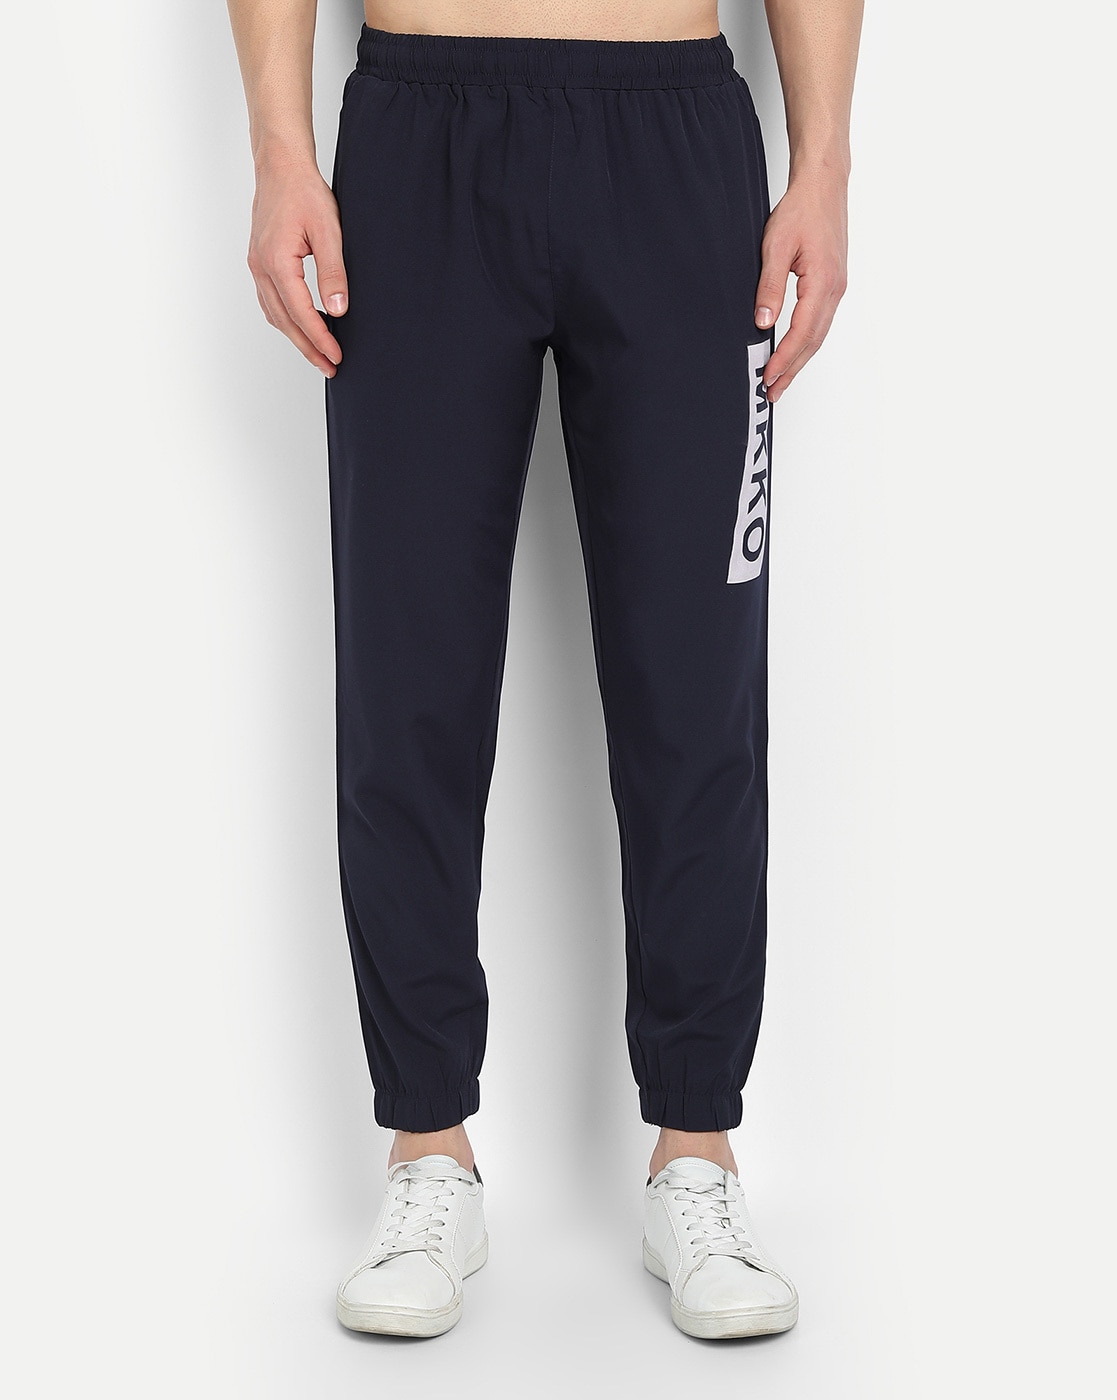 ALSTYLE trackpantsmenwesternwear  Buy ALSTYLE Mens Anklelength Track  Pants Online  Nykaa Fashion